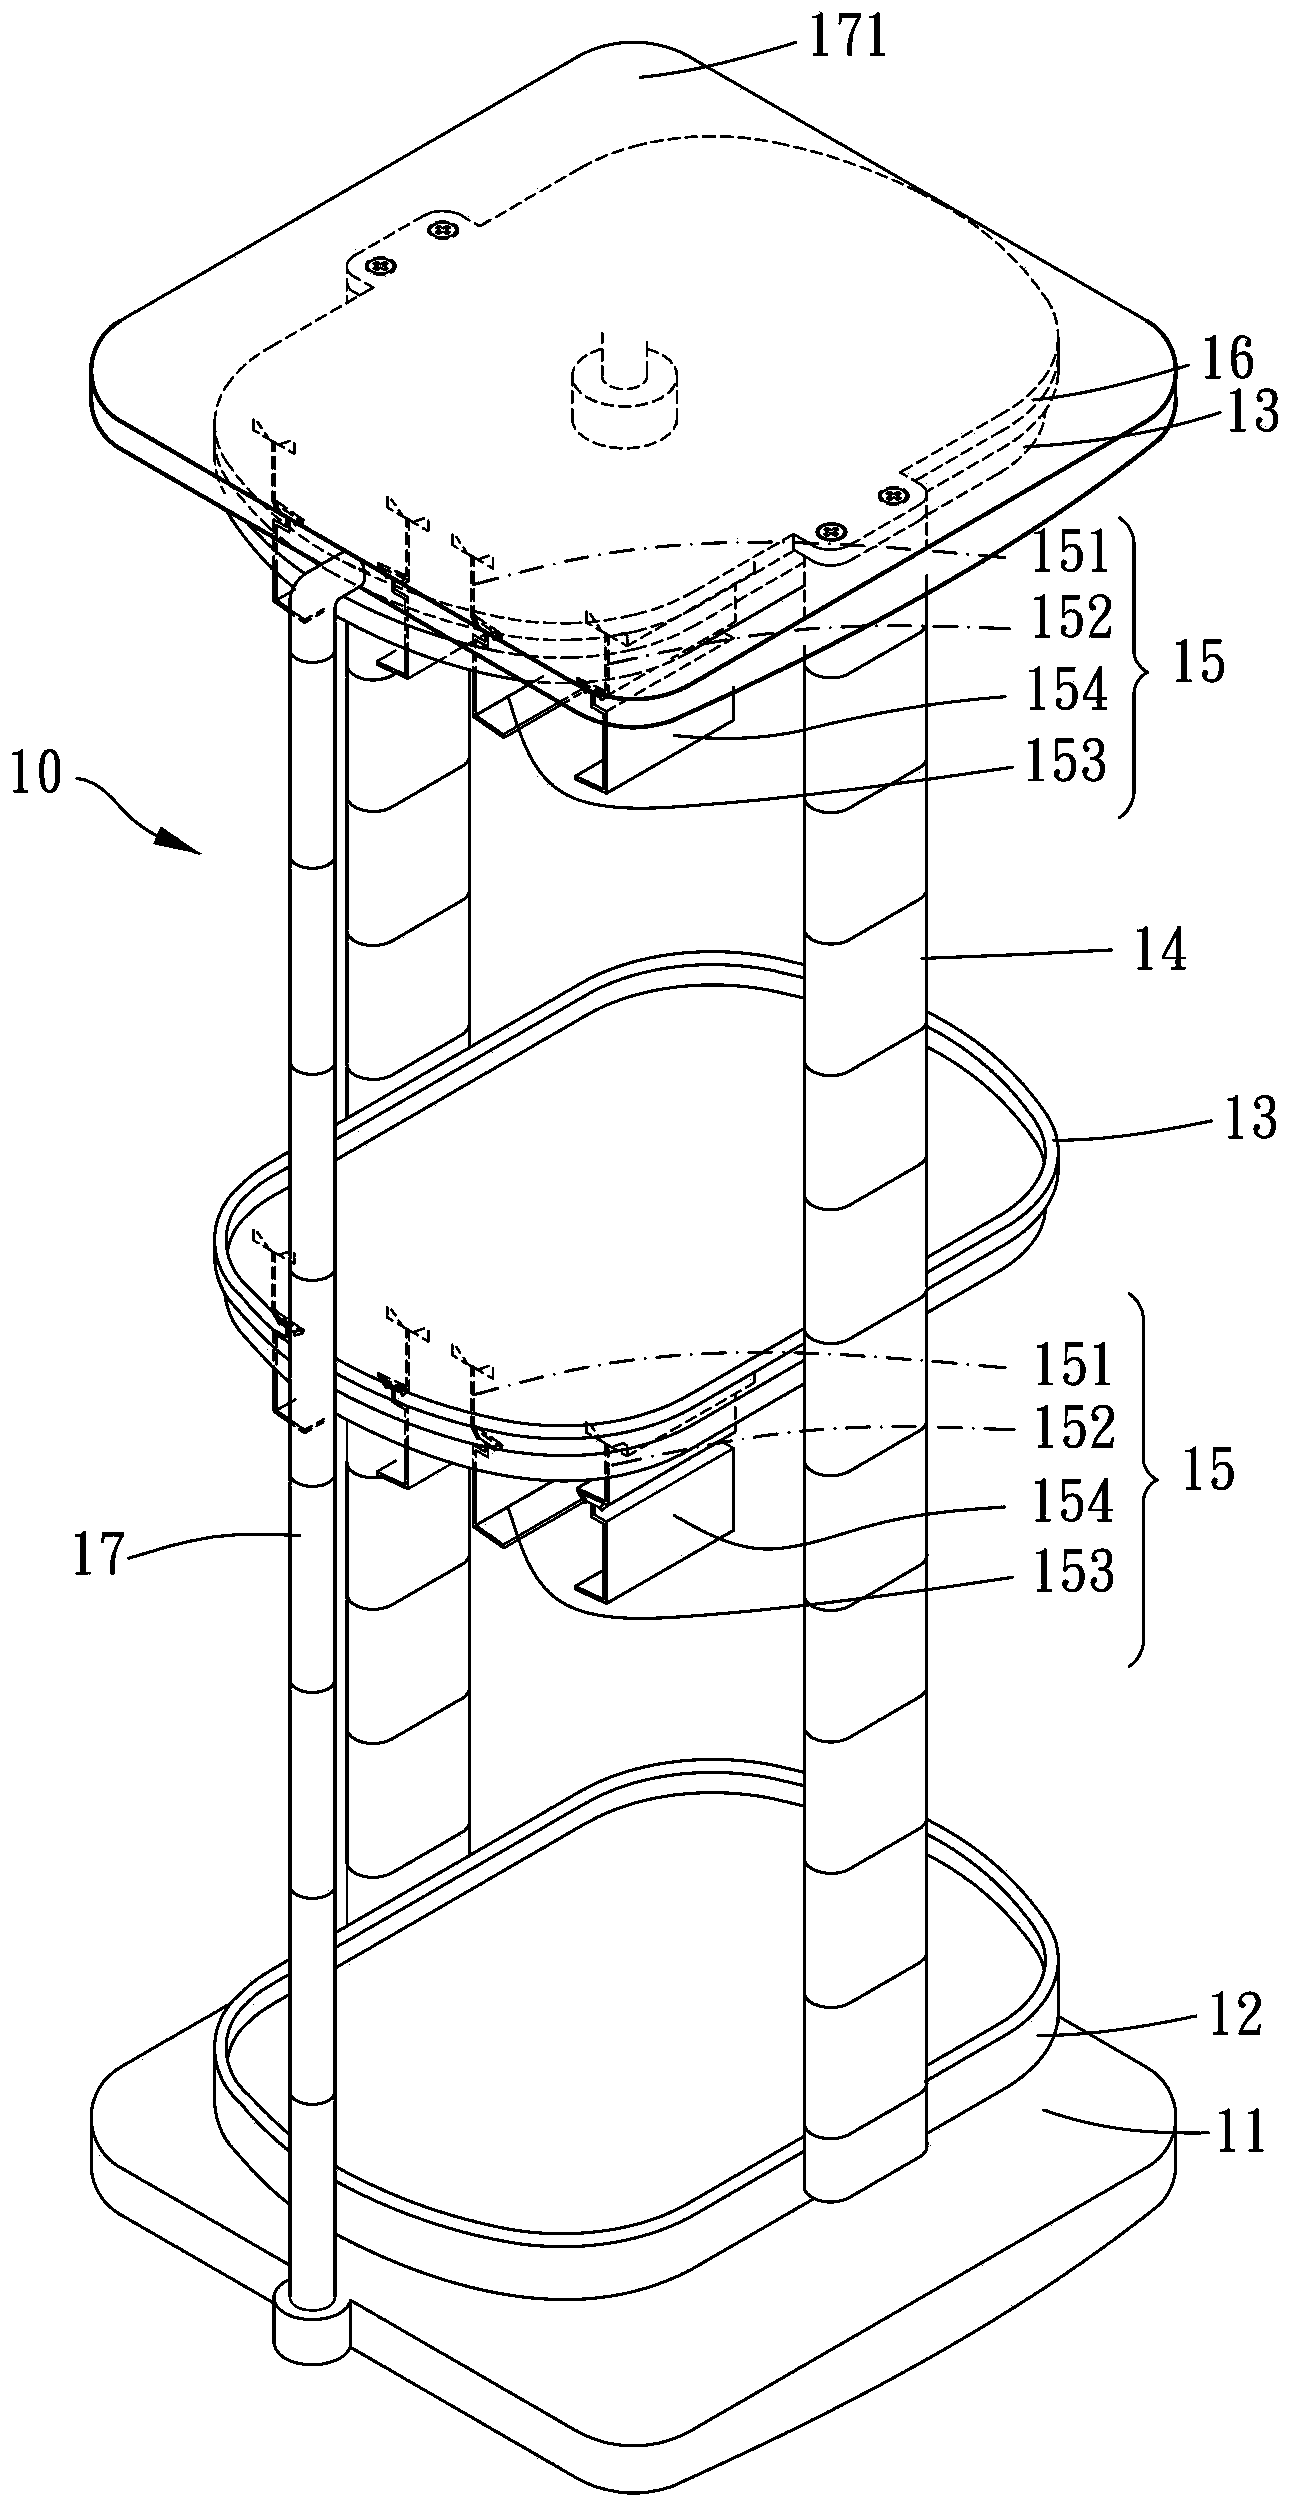 Boot frame structure